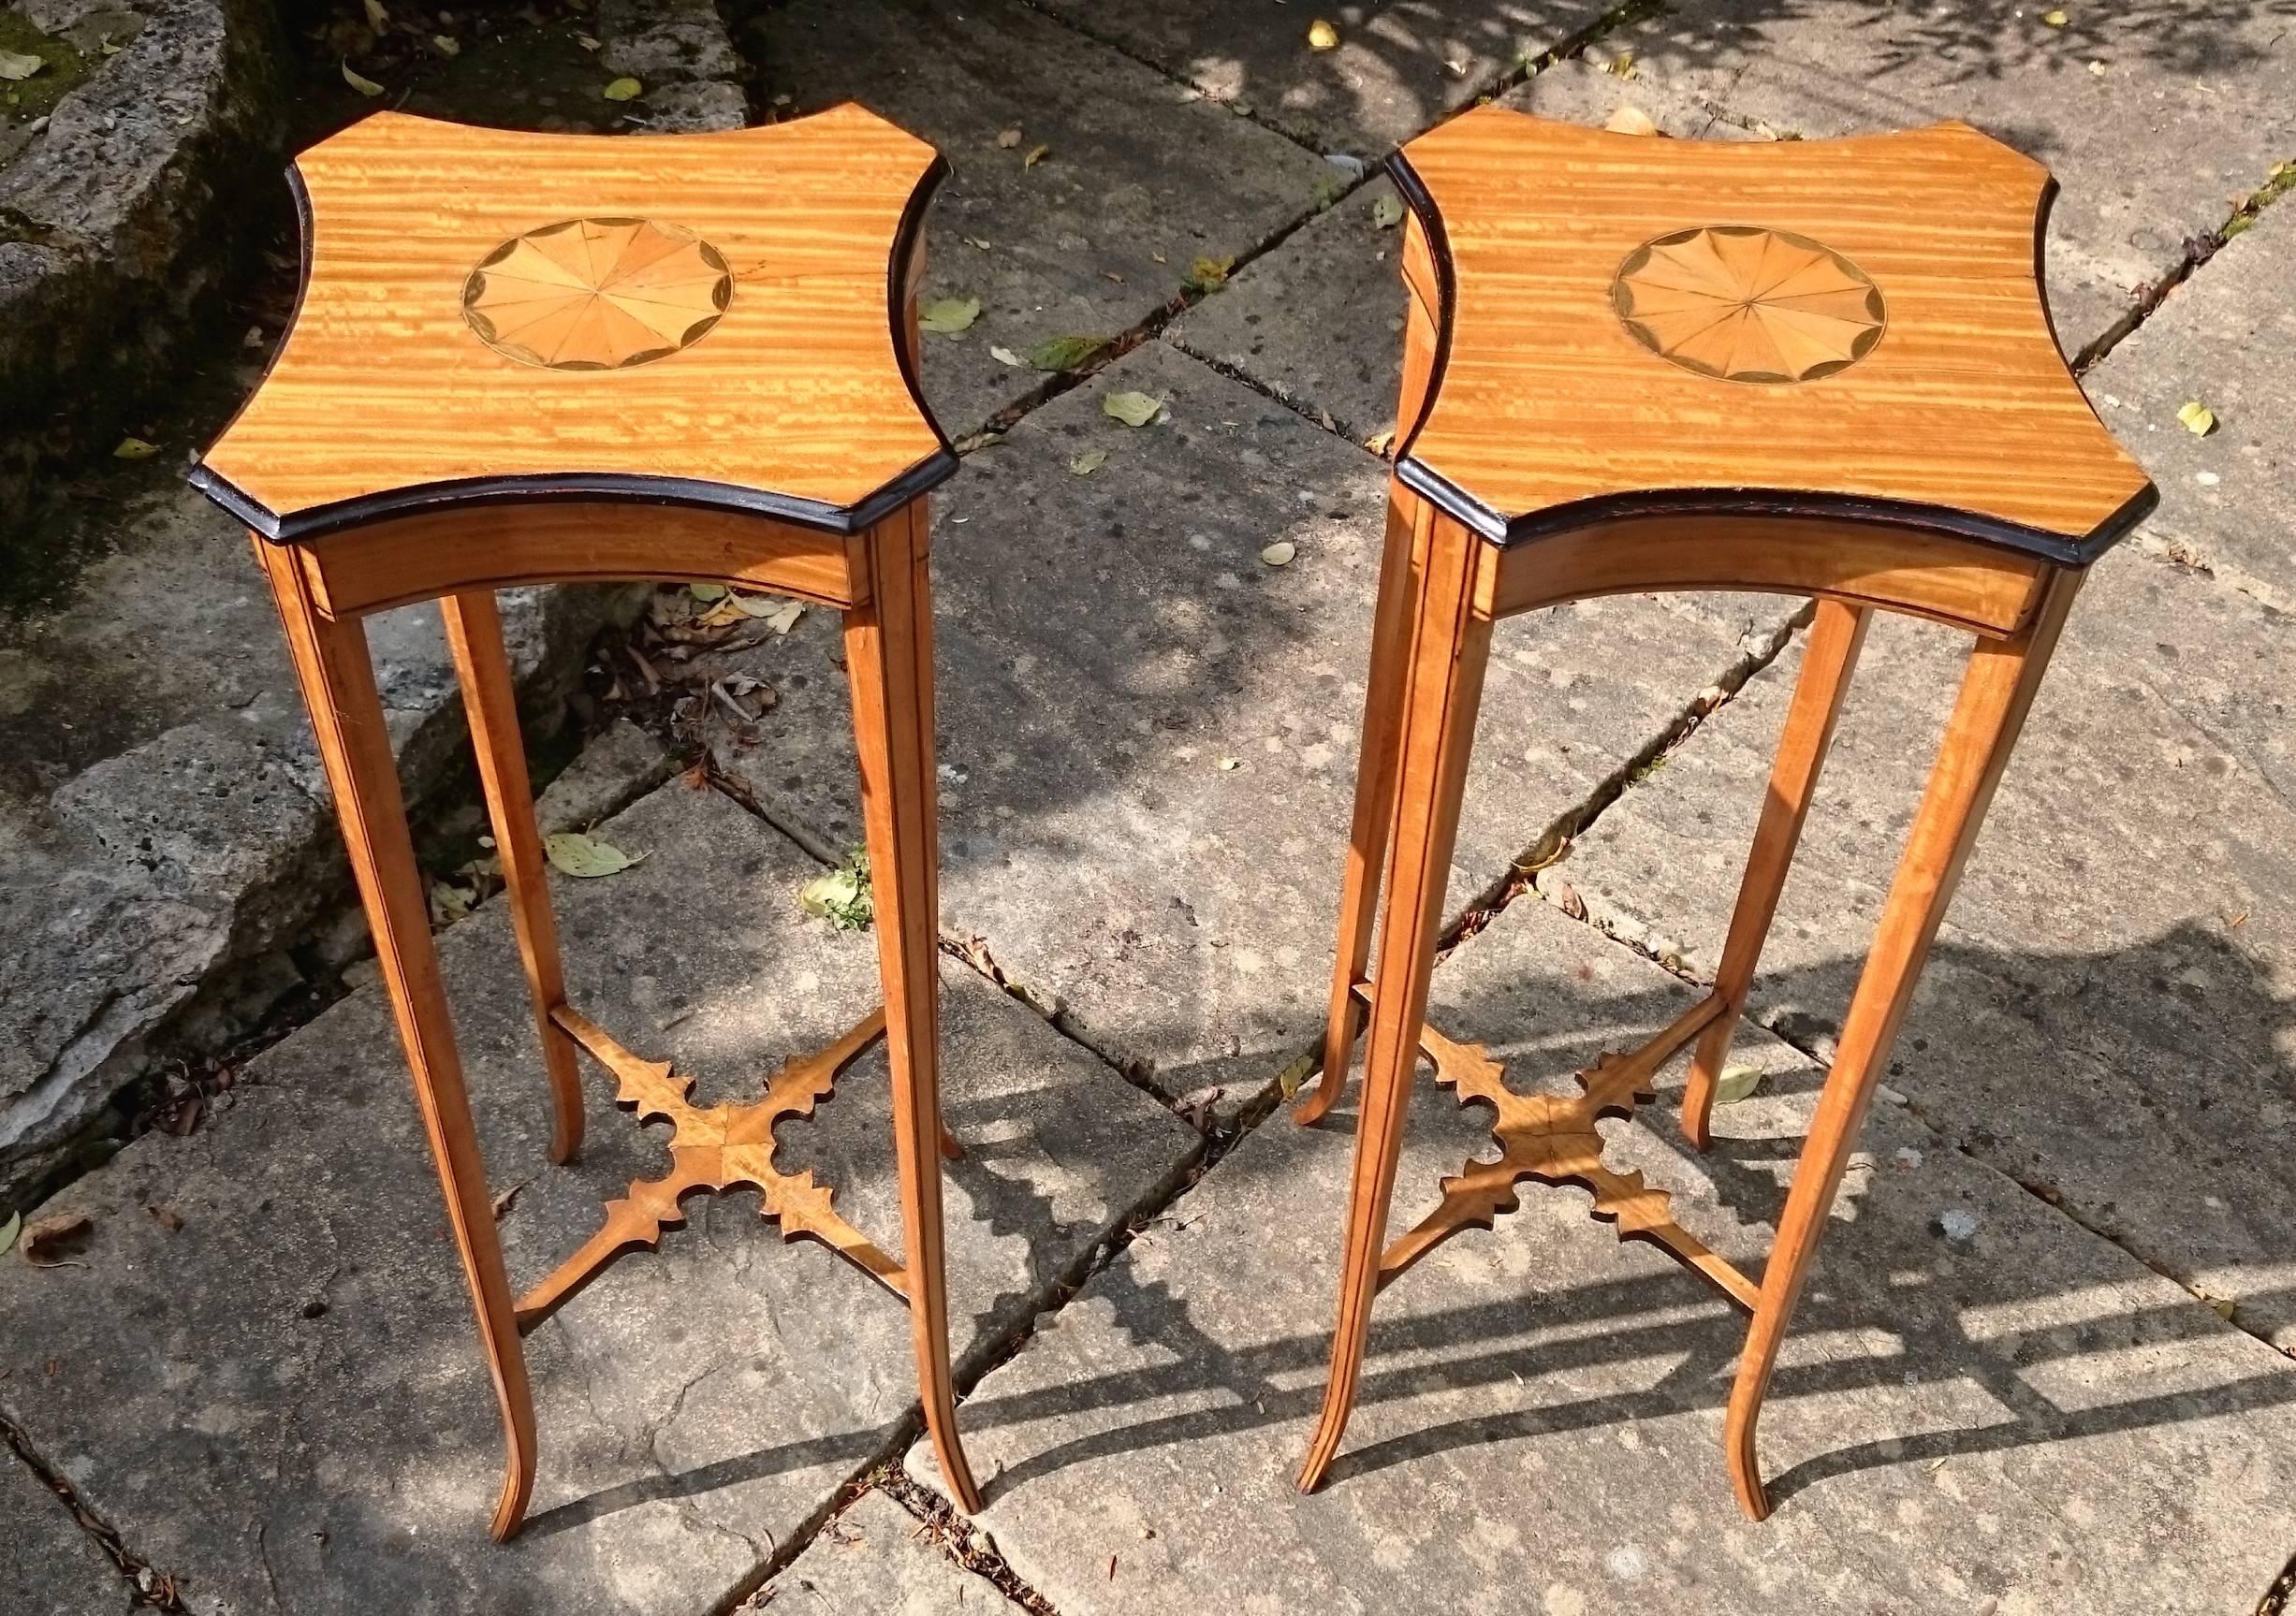 Fine pair of Georgian revival wine tables. This pair of tables are made of a particularly interesting cut of satin wood with Harewood / sycamore inlay and ebonized detail. The splay legs make them more stabile than their elegant design would